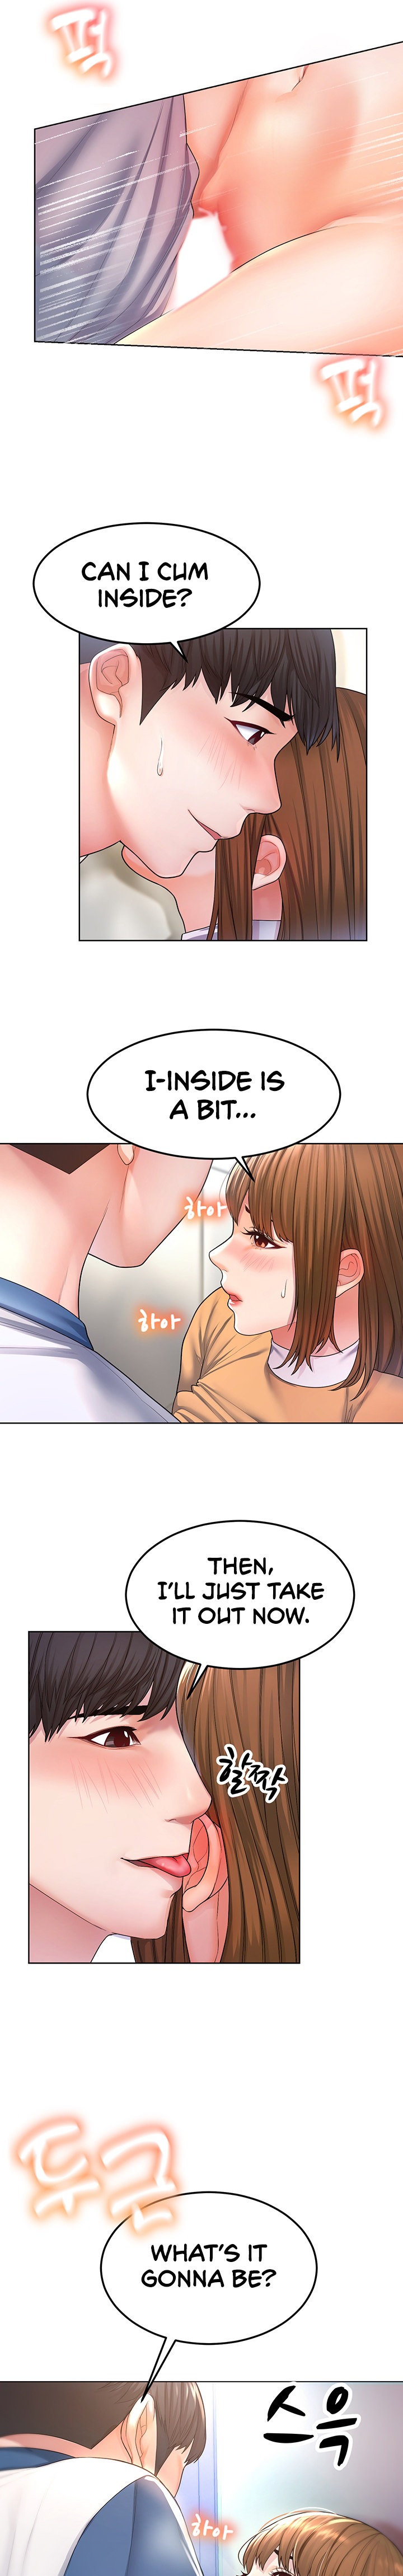 Could You Please Touch Me There? - Chapter 1 Page 10